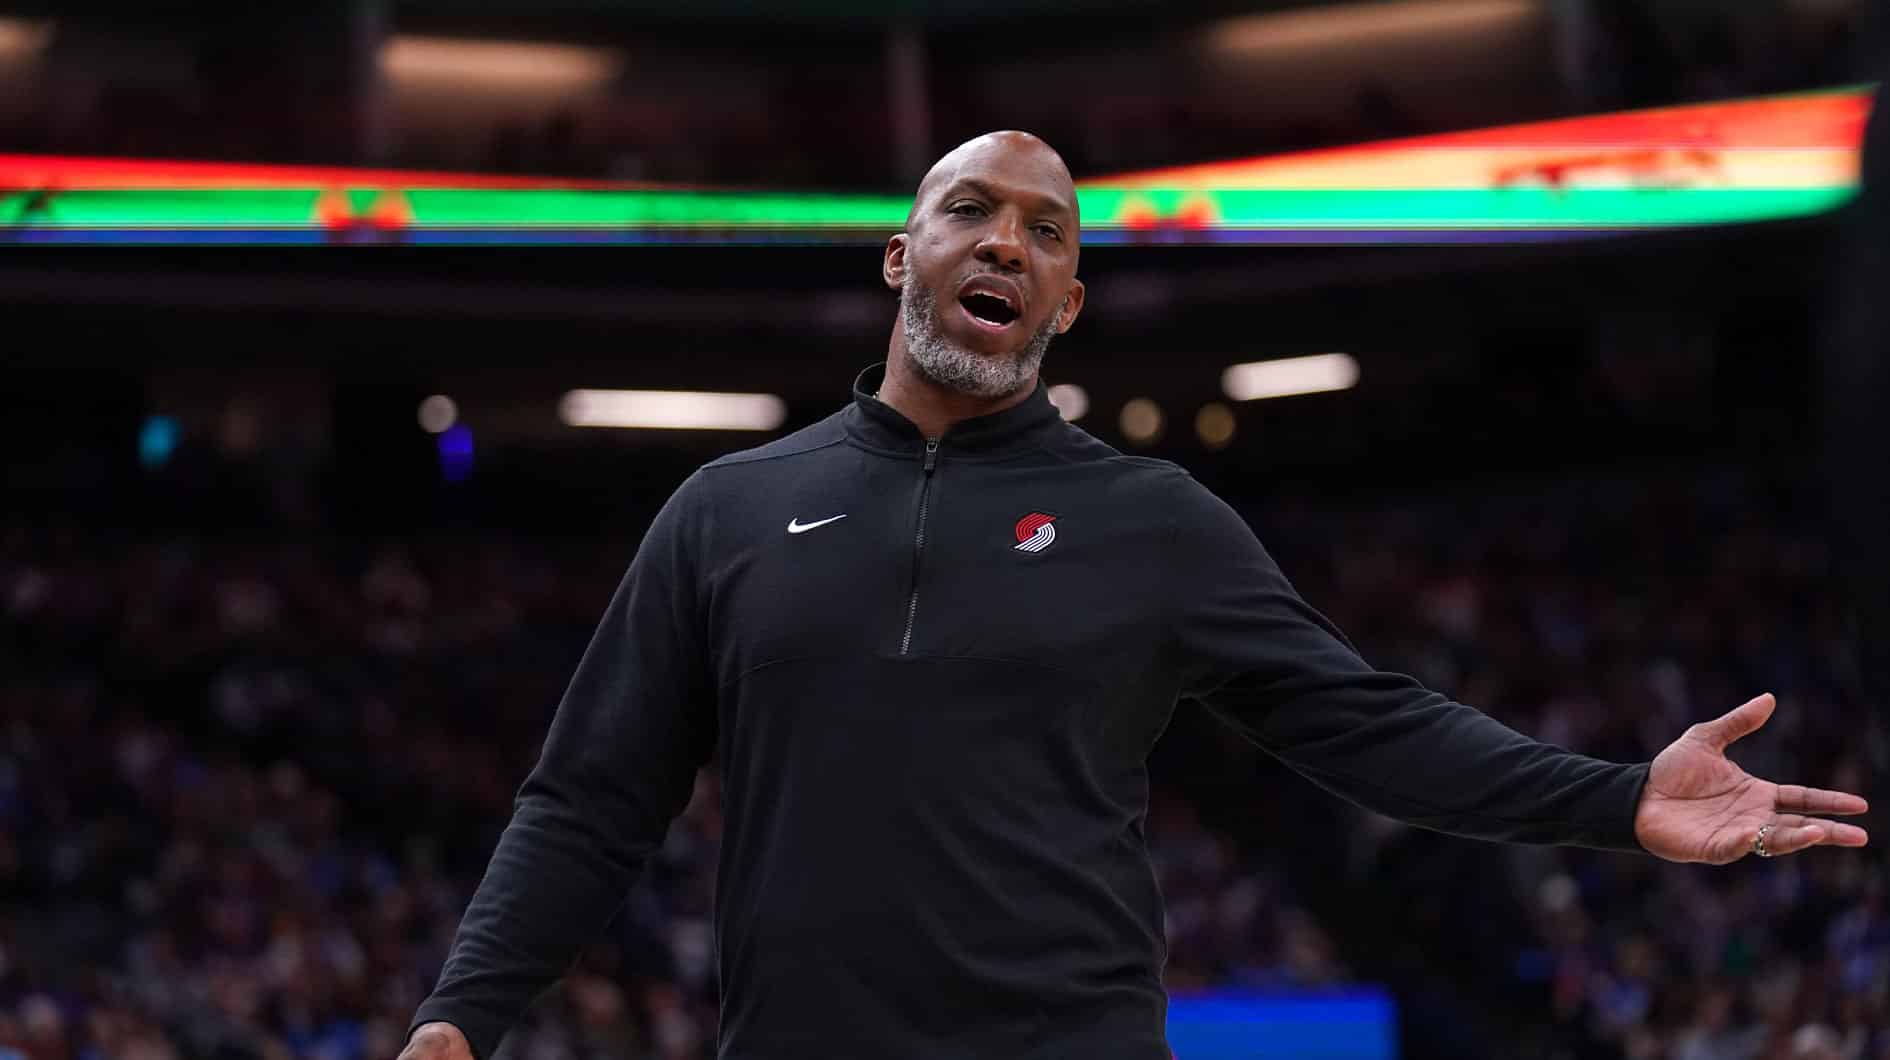 Portland Trail Blazers head coach Chauncey Billups talks to a referee after a play against the Sacramento Kings in the fourth quarter at the Golden 1 Center